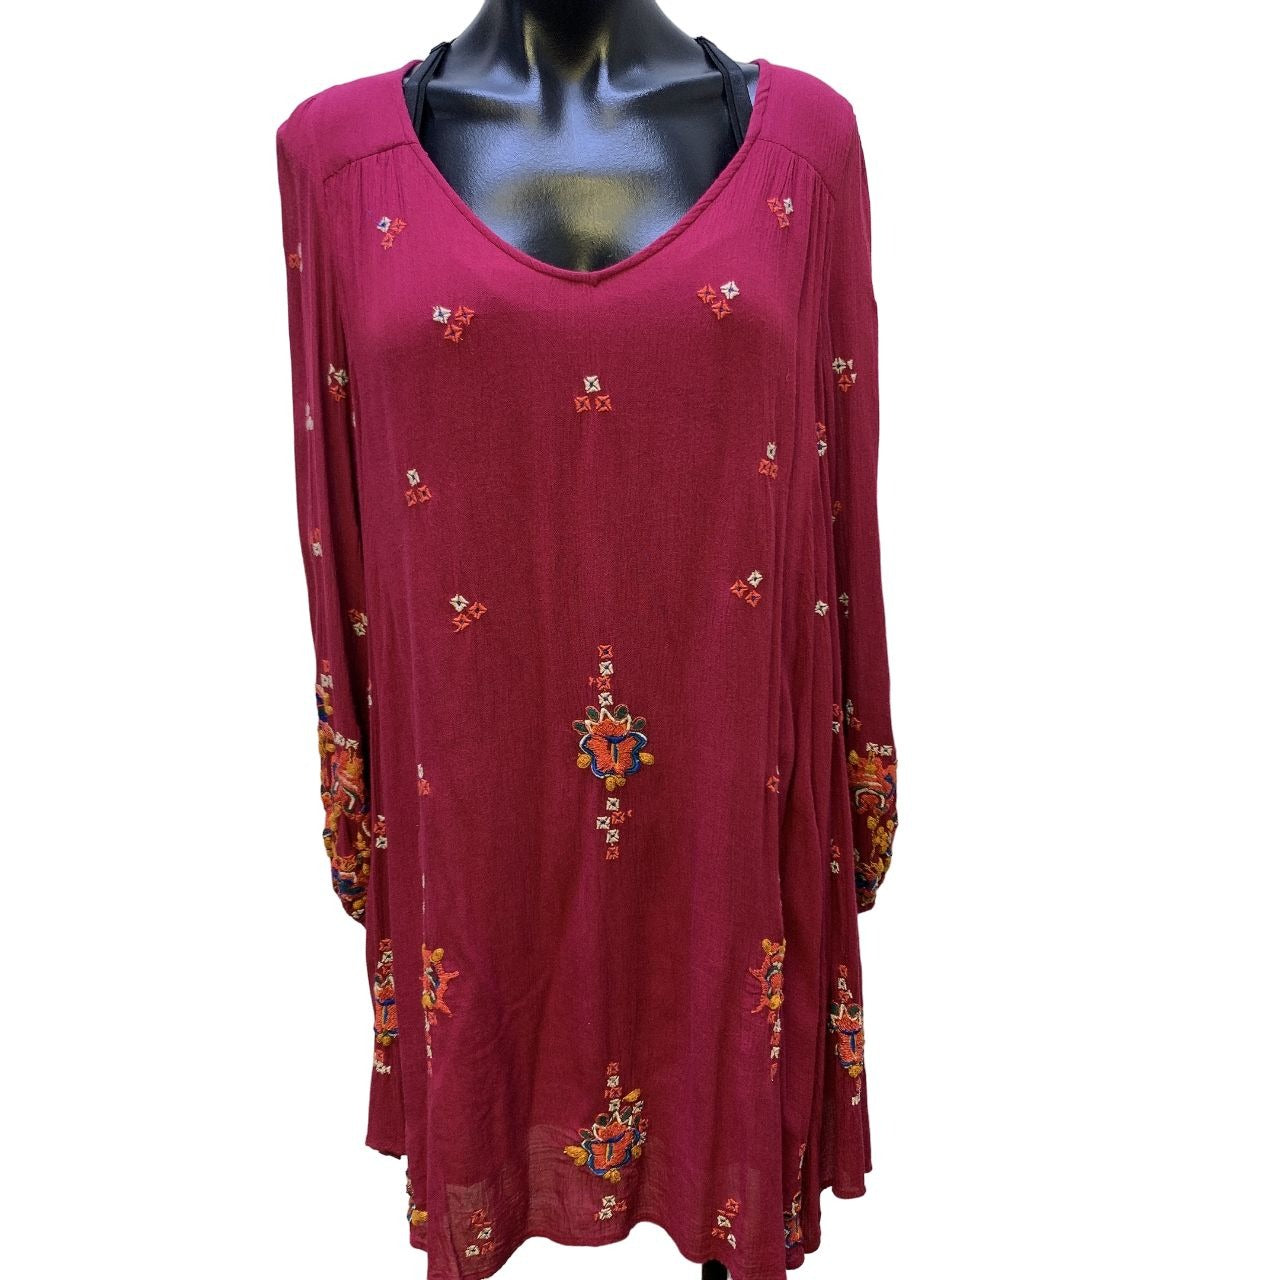 *Free People Burgundy Open Back Embroidered Dress Medium